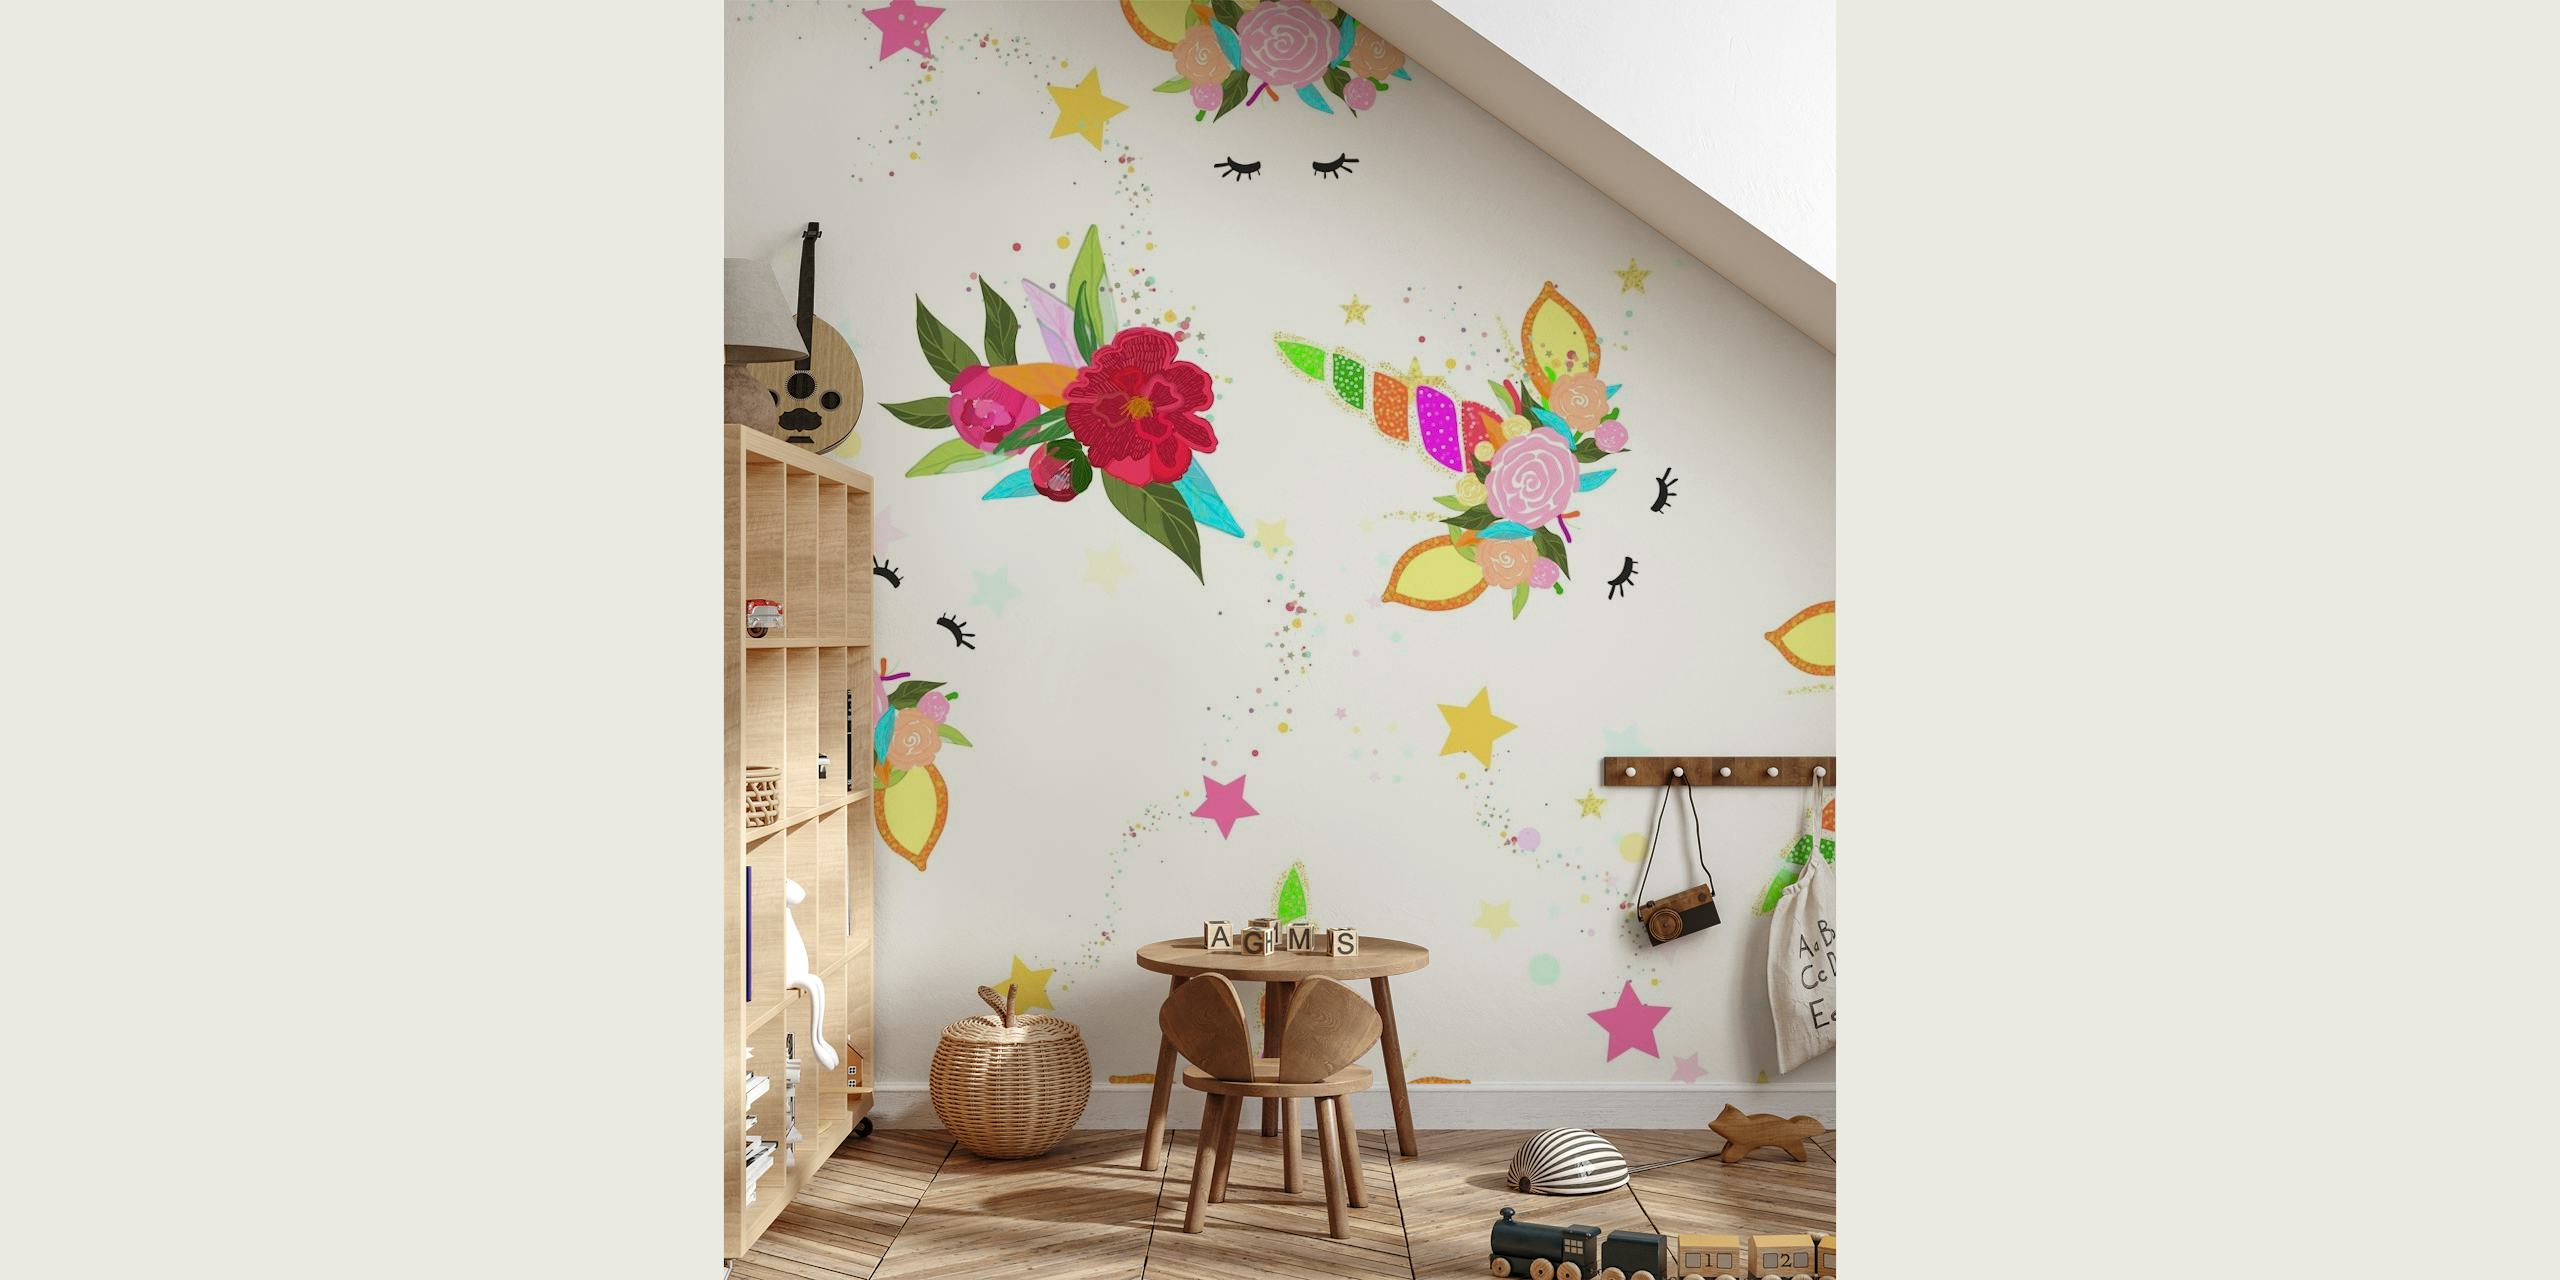 Magical unicorn and colorful flowers wall mural design